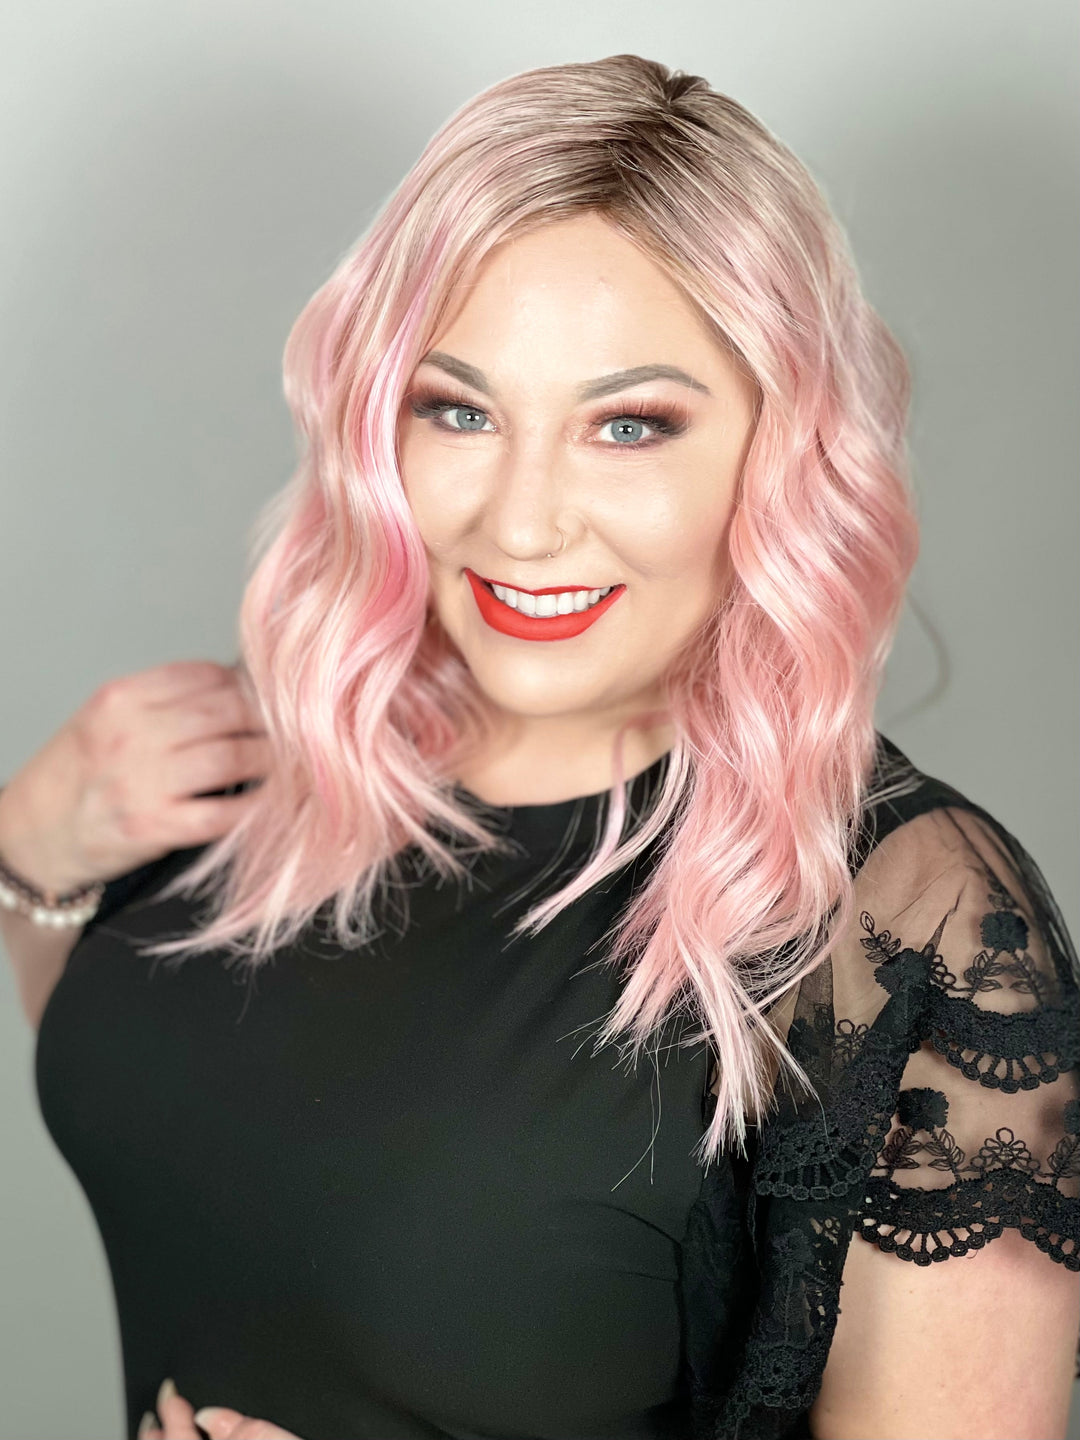 Styles-By-Soma LUXURY WIG RUSH HOUR (LUXE) - Dusty Rose